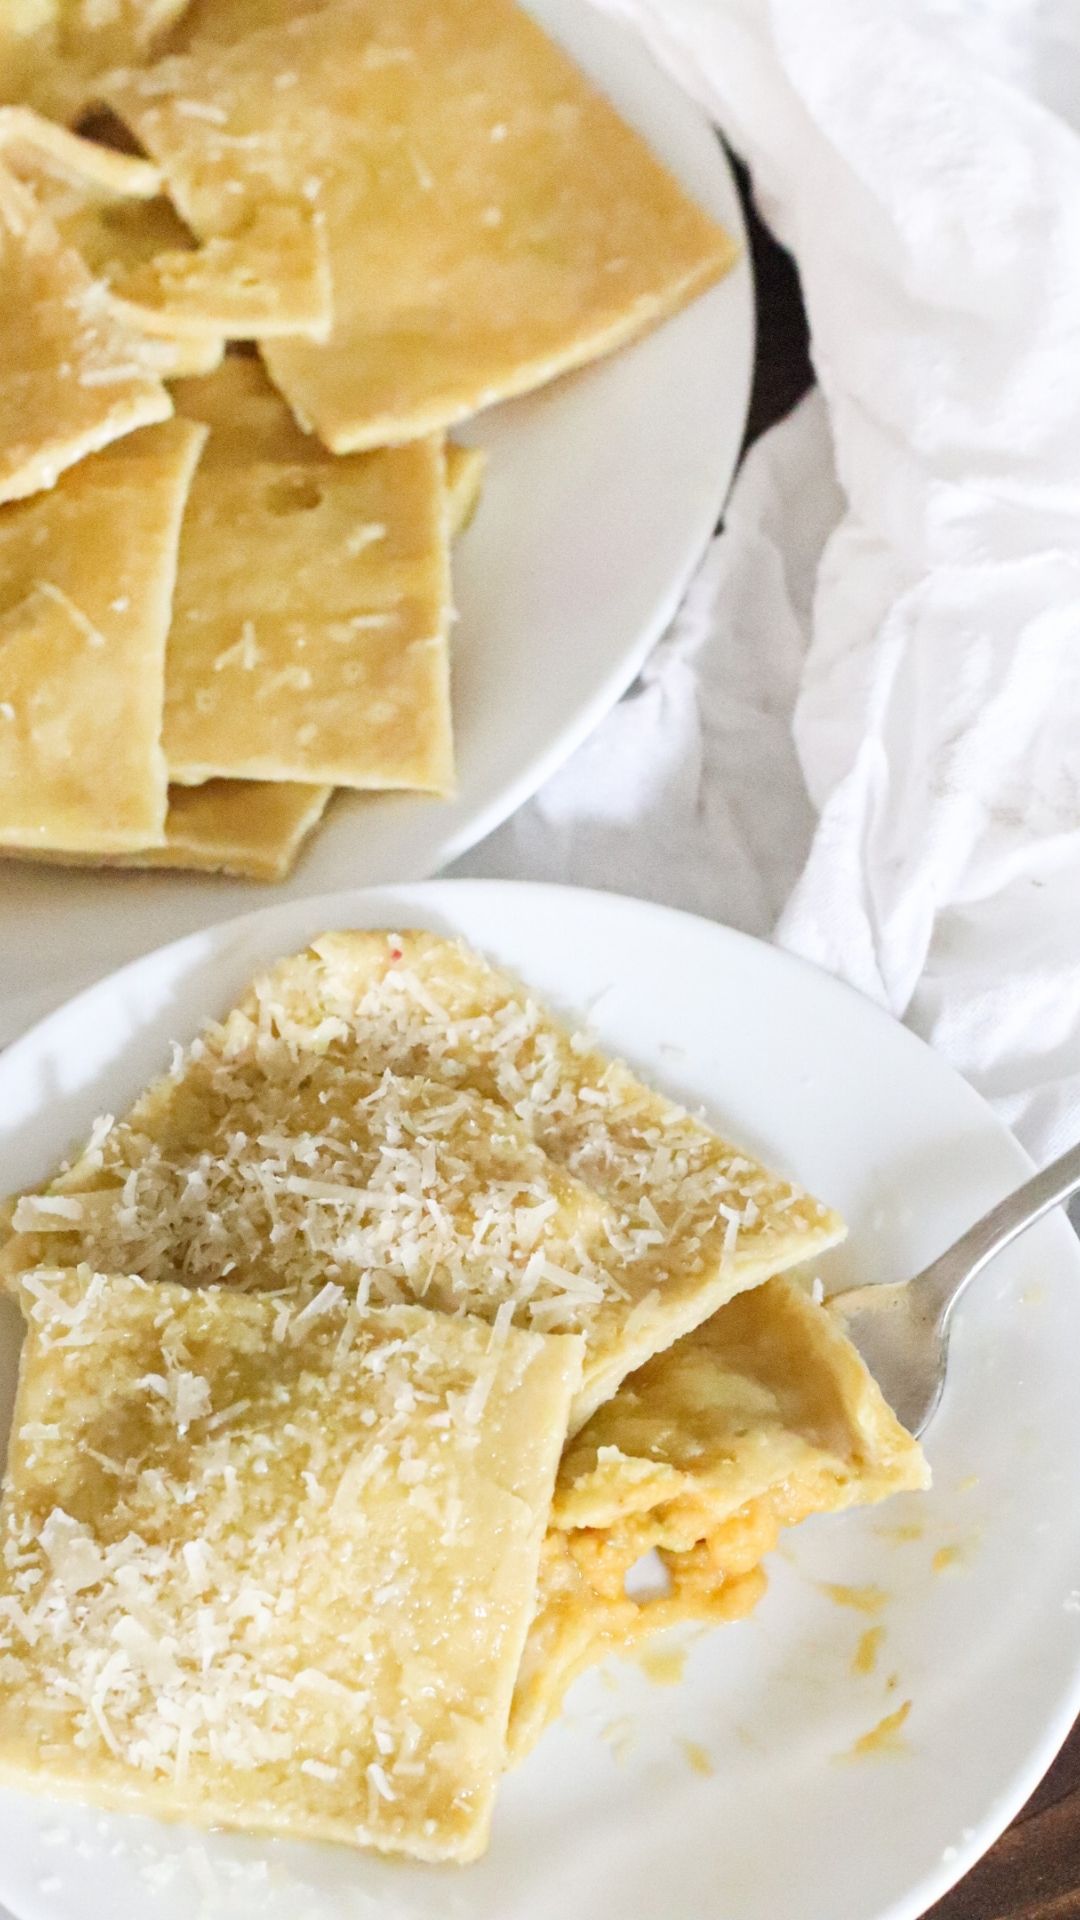 https://theduvallhomestead.com/wp-content/uploads/2021/10/1-how-to-make-ravioli-without-a-pasta-maker-nopasta-machine-homemade-ravioli-without-a-mold-einkorn-ravioli-recipe-butternut-squash-filling-healthy-dinner-ideas-fall-recipes.jpg